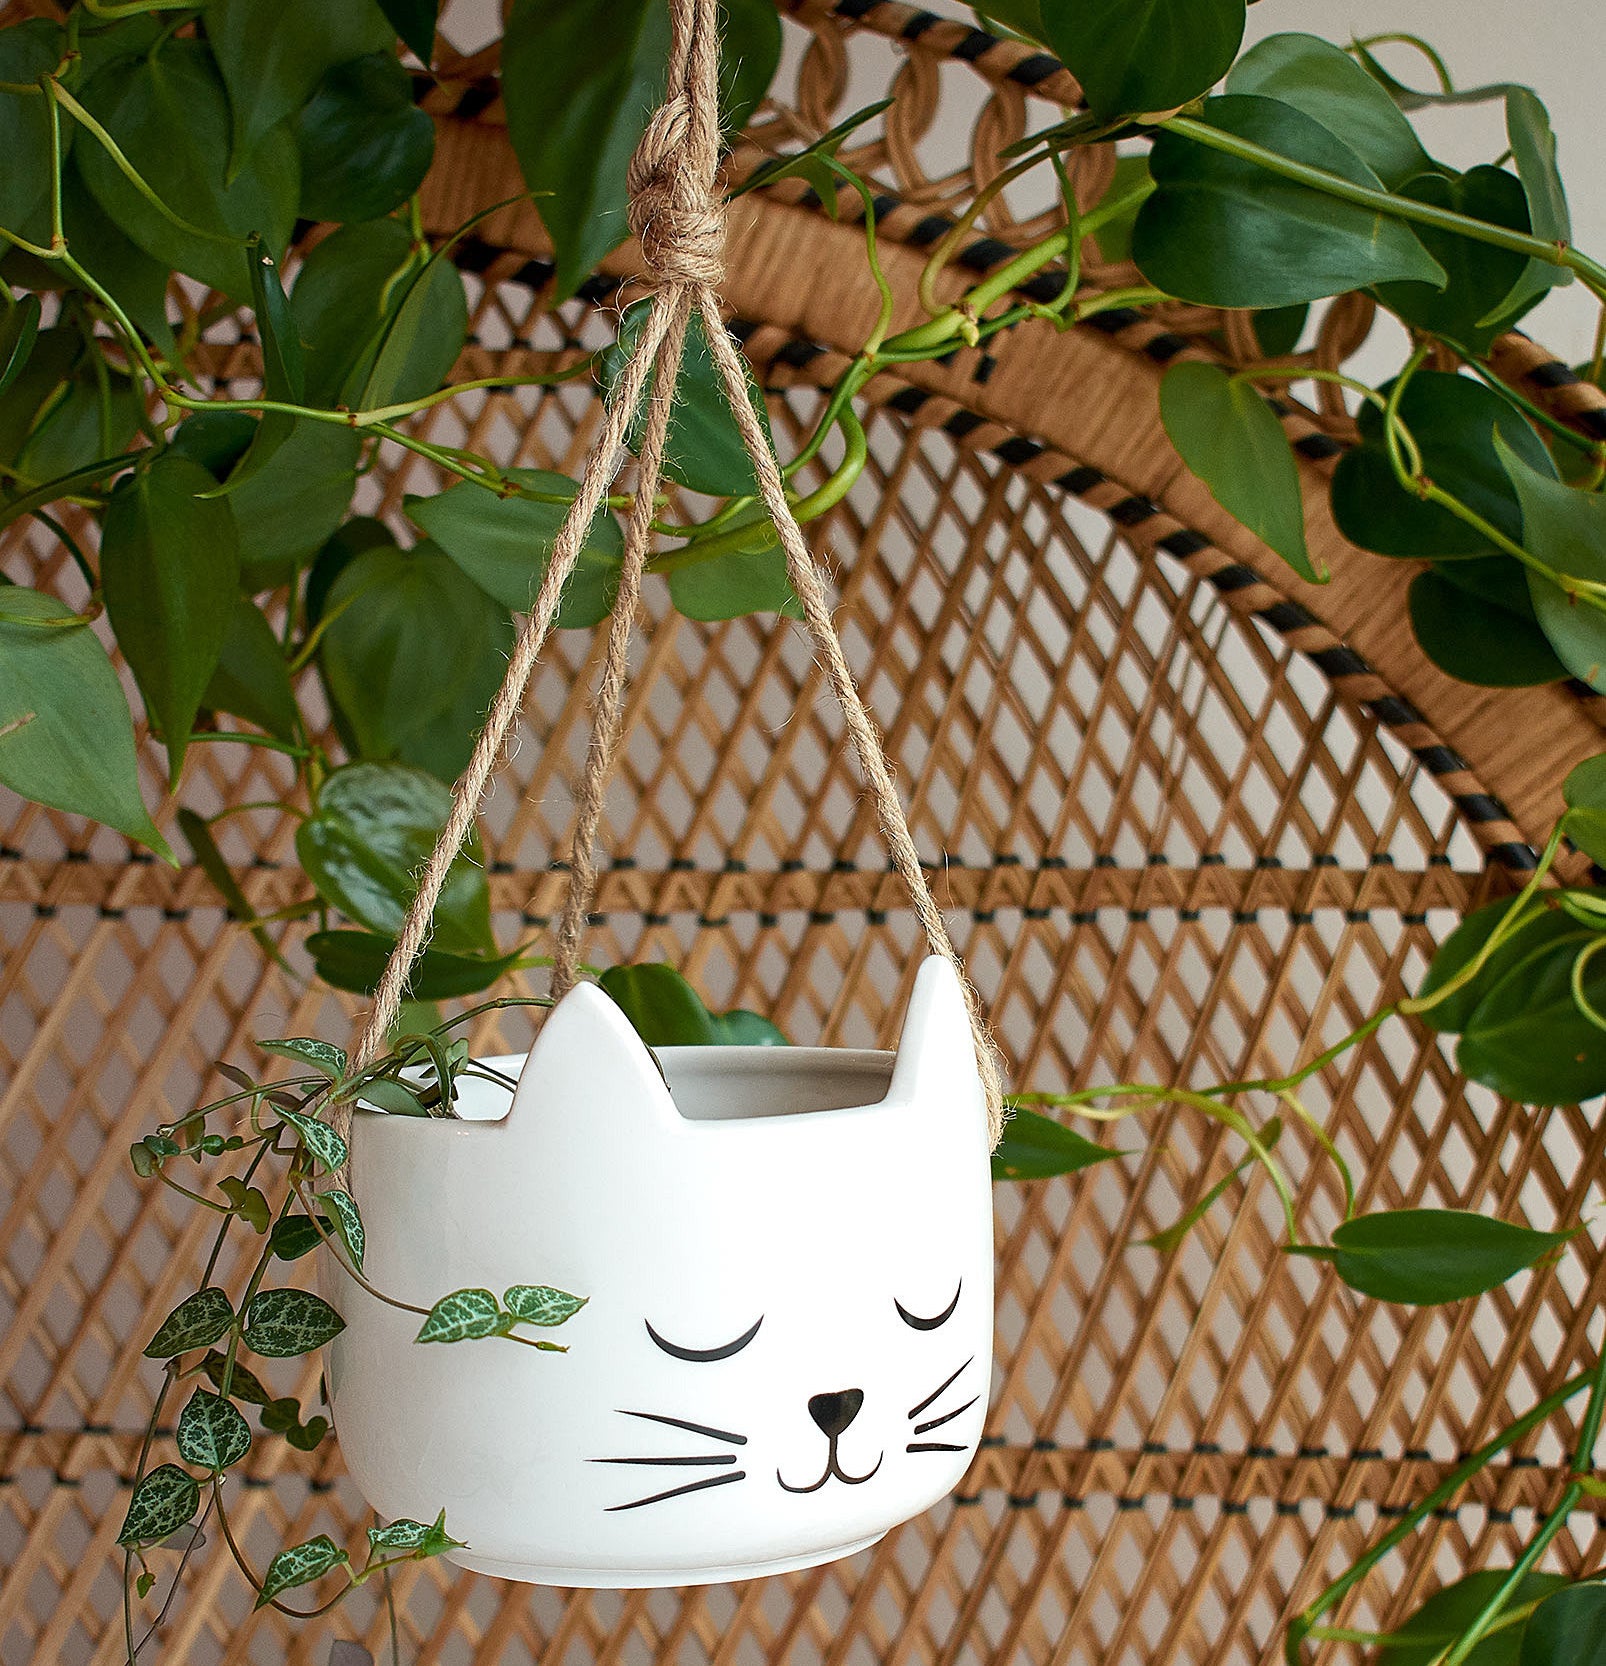 Hanging planter in the shape of a cat face 